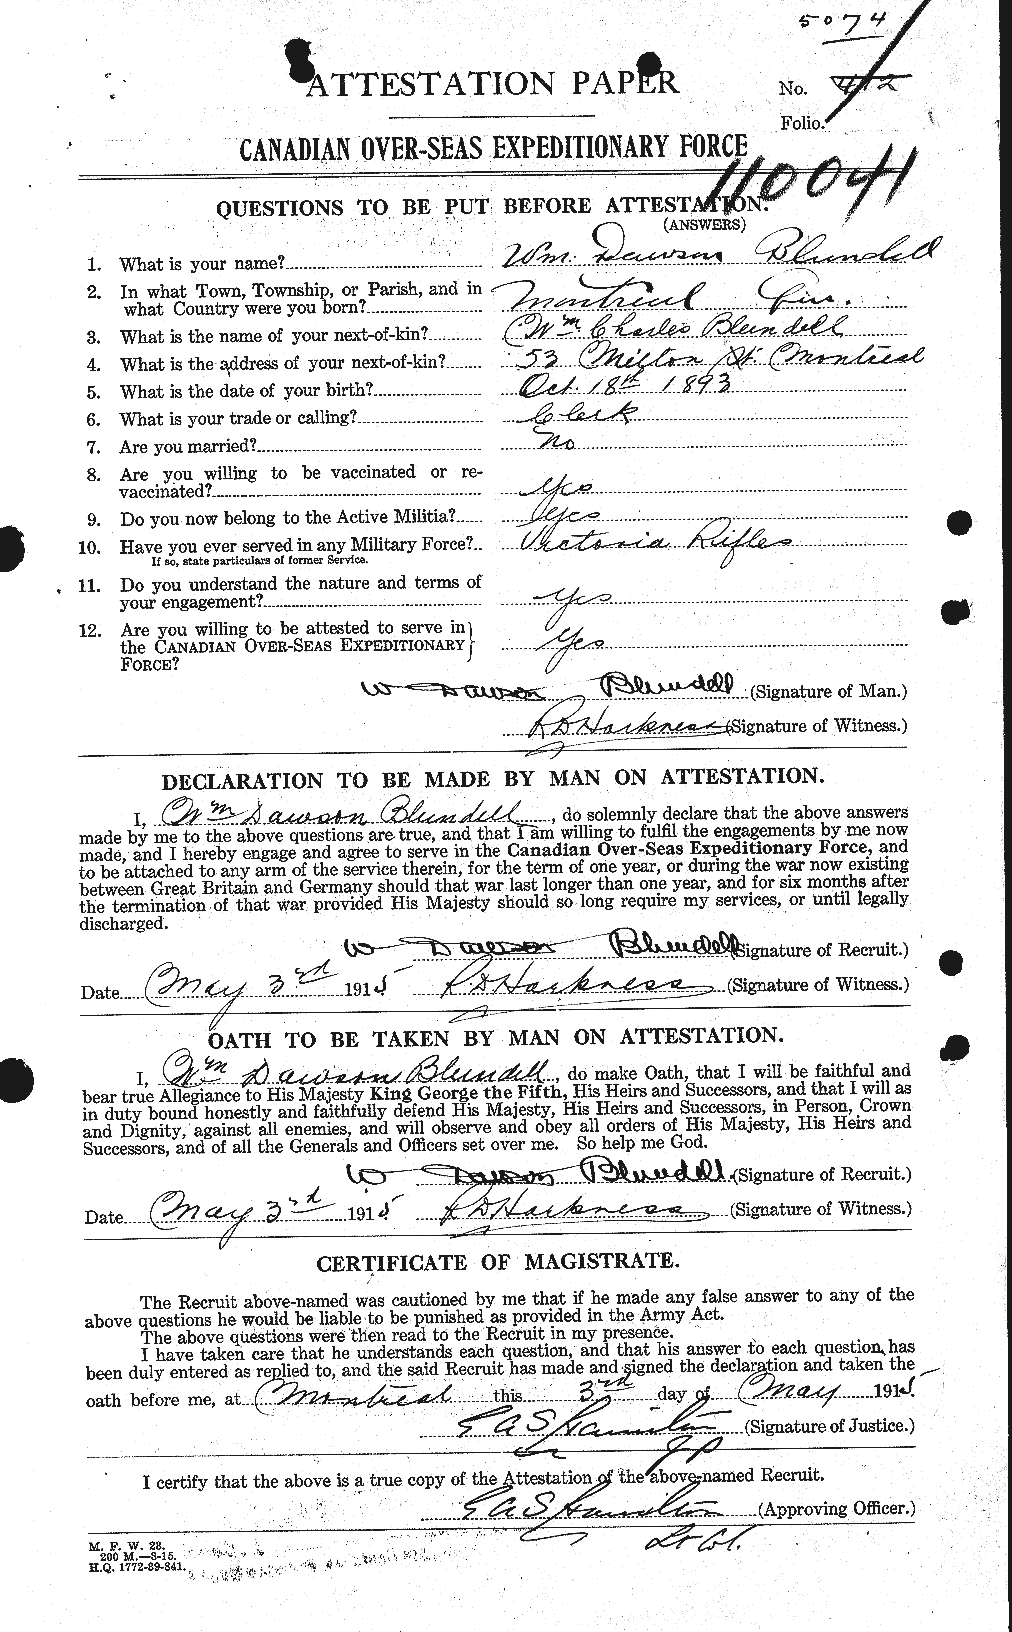 Personnel Records of the First World War - CEF 247210a